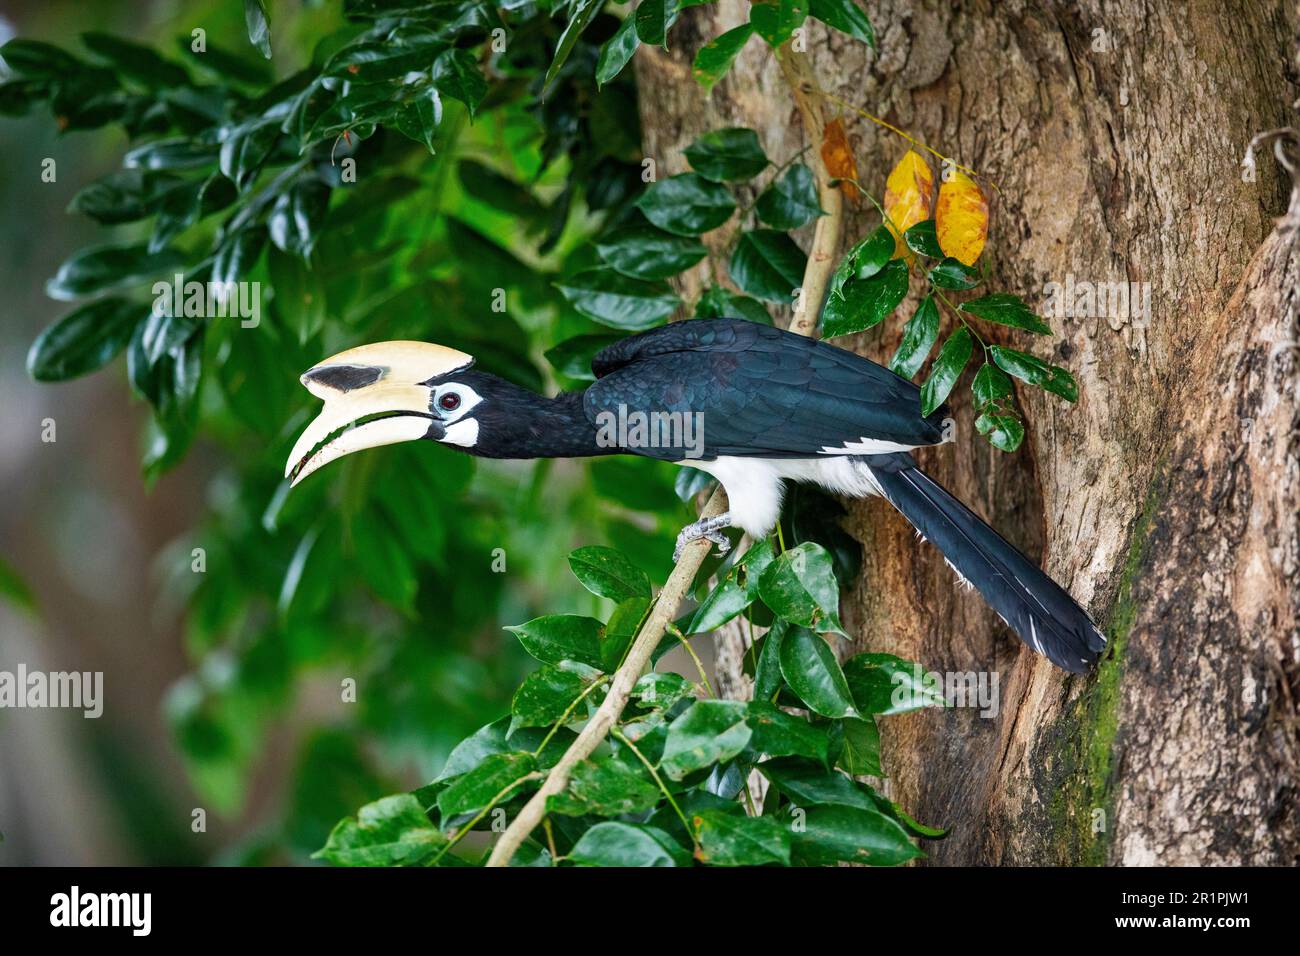 Adult male oriental pied hornbill brings a beetle to courthship feed his partner and encourage nest building in the trunk of an angsana tree, Singapor Stock Photo